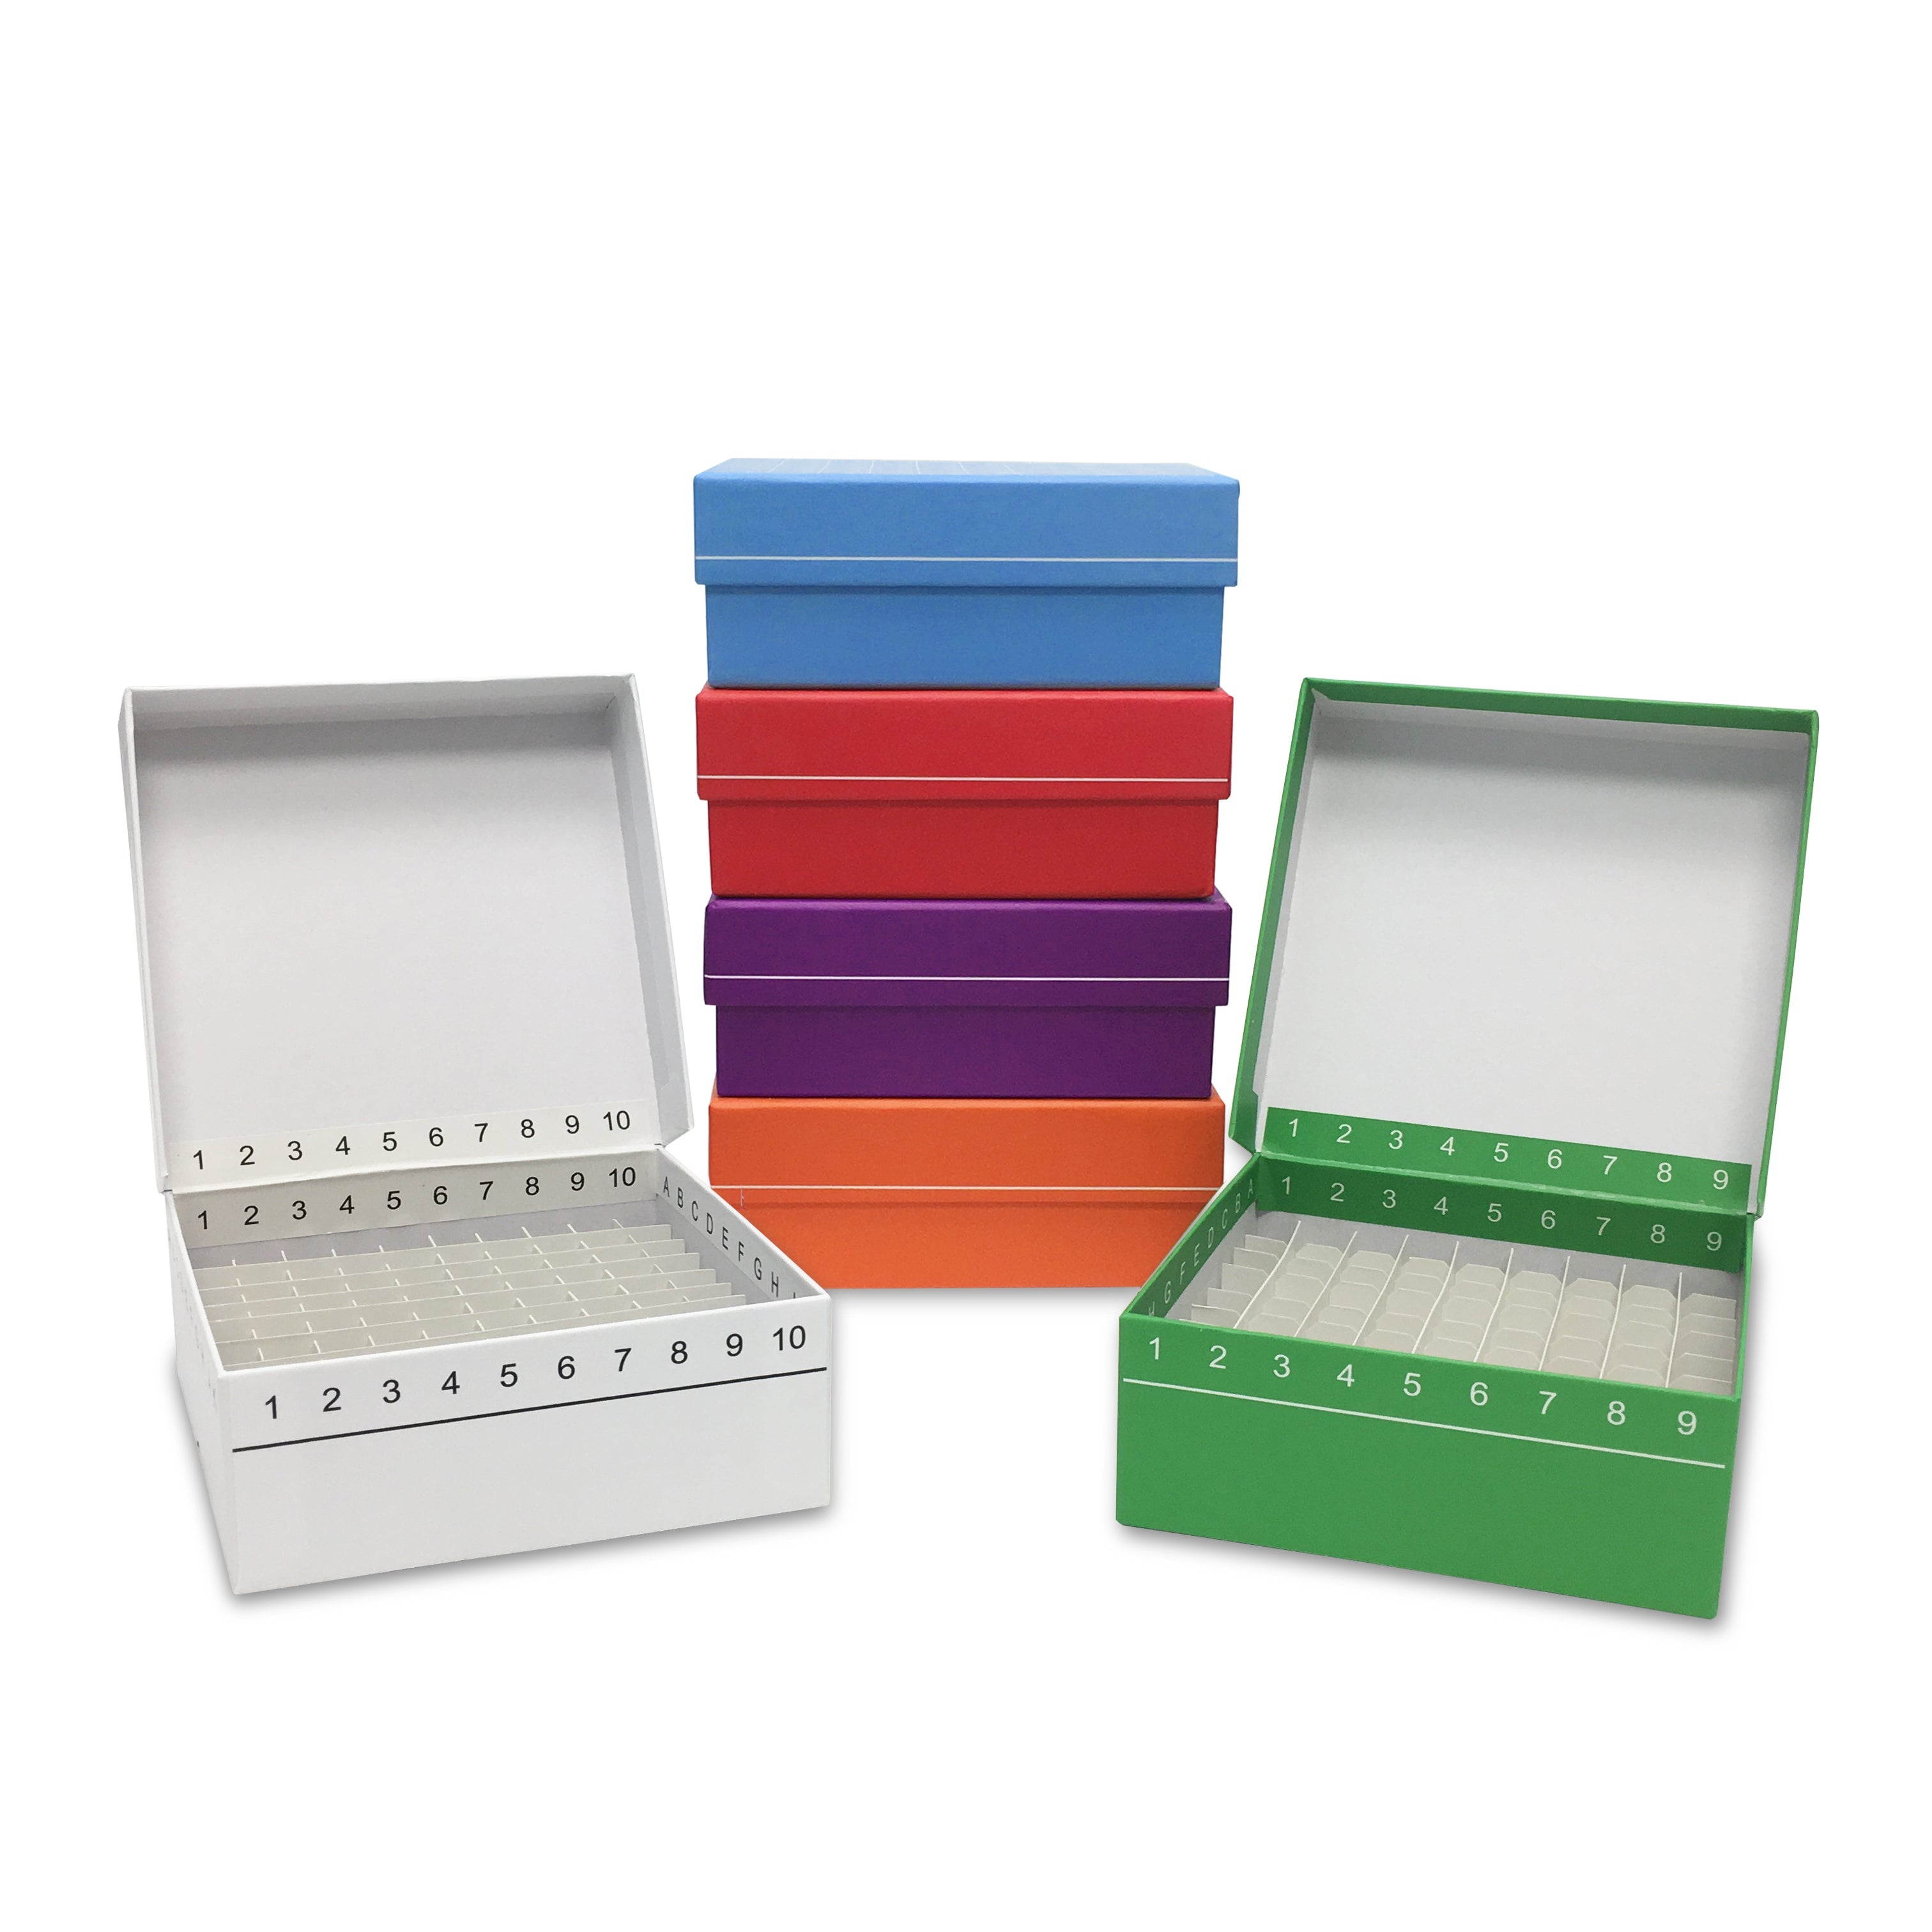 MTC Bio R2700-R FlipTop™ Carboard freezer box w/ attached hinged lid, 100-place, red, 5/pk